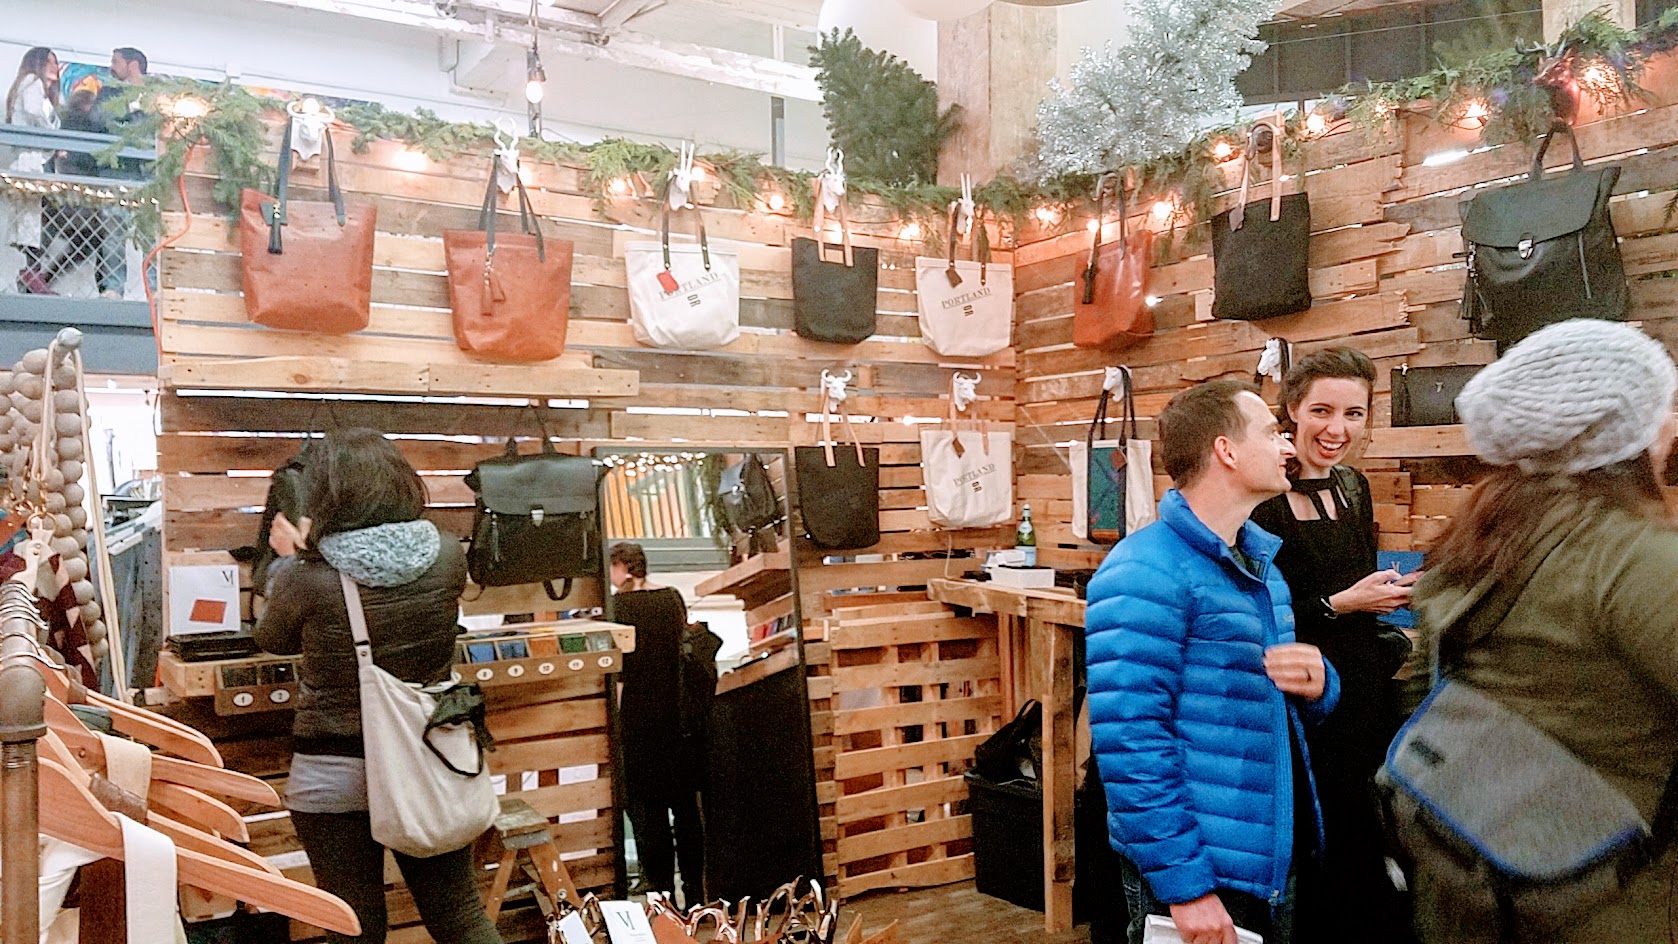 The vibe of the Portland Night Market, held every few months in the Central Industrial District in a warehouse, during the November 2016 market